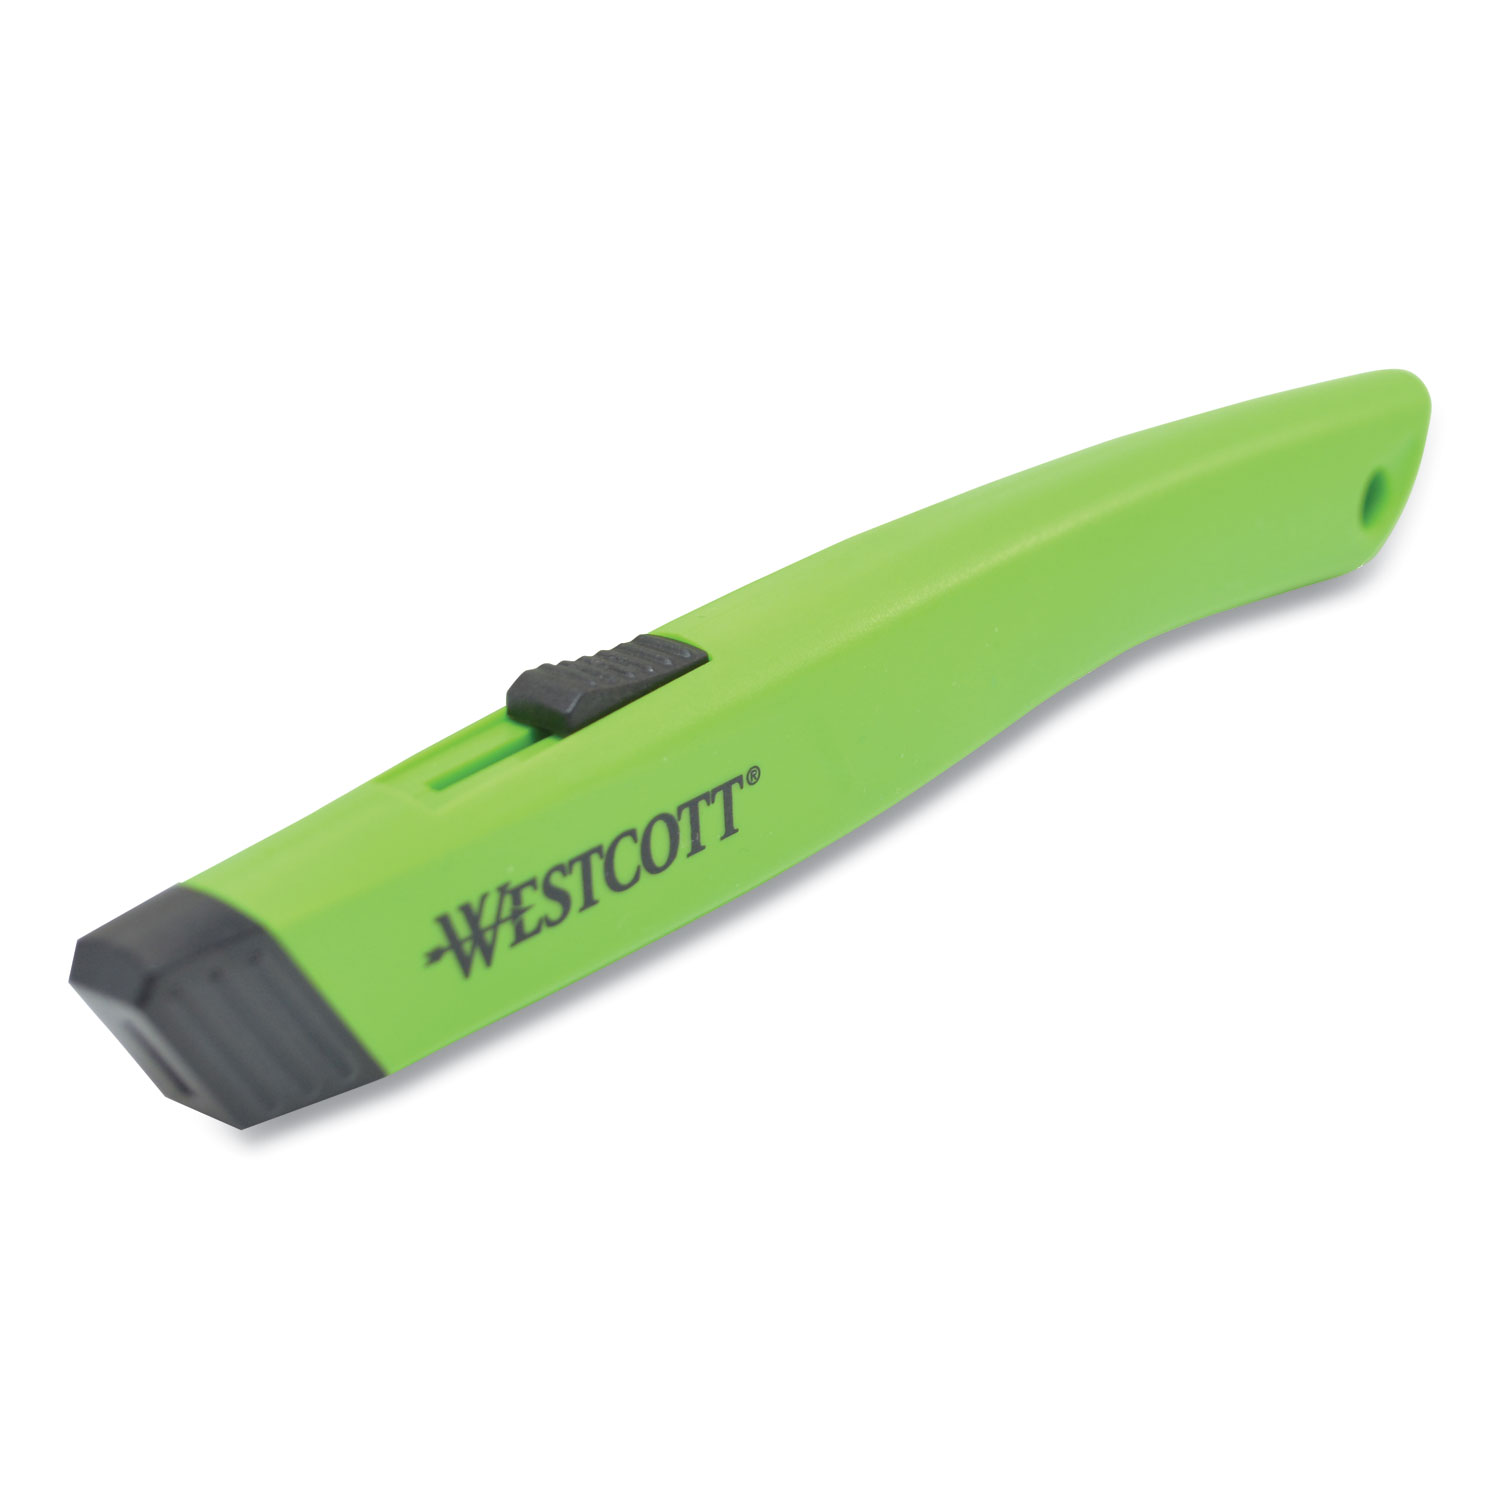 Safety Ceramic Blade Box Cutter, 0.5 Blade, 5.5 Plastic Handle, Green -  BOSS Office and Computer Products